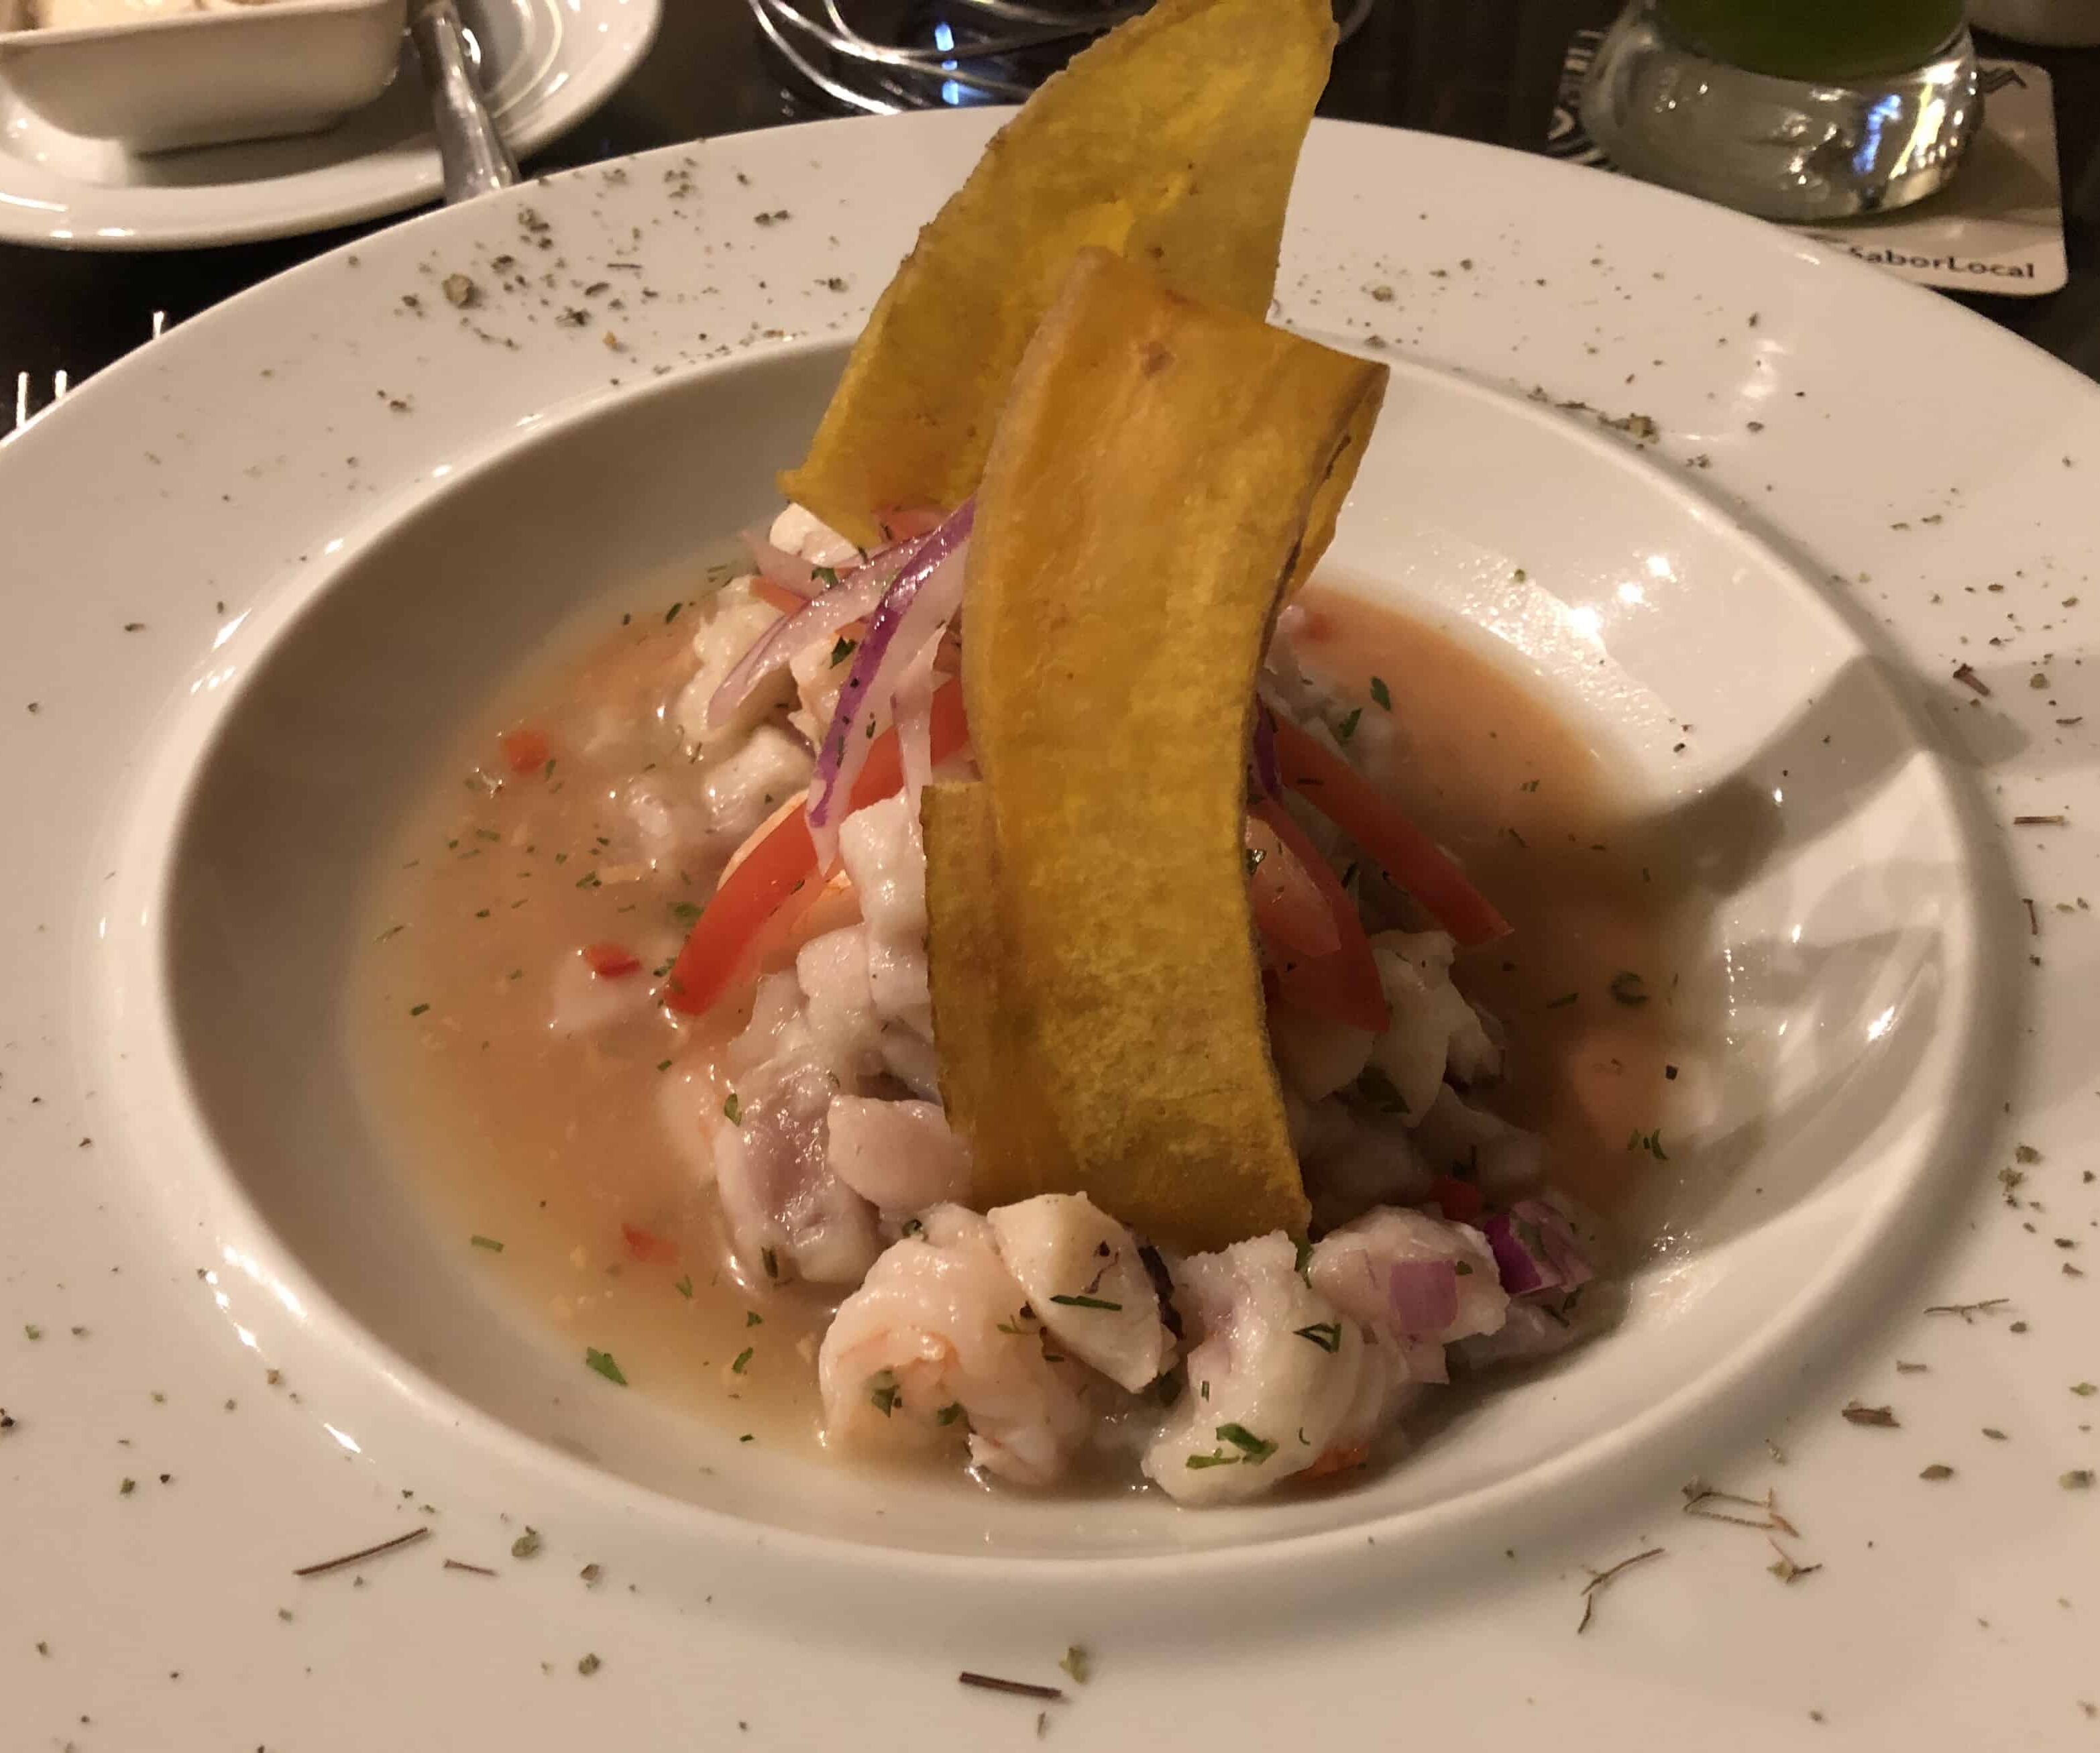 Ceviche at the restaurant at the Movich Buró 26